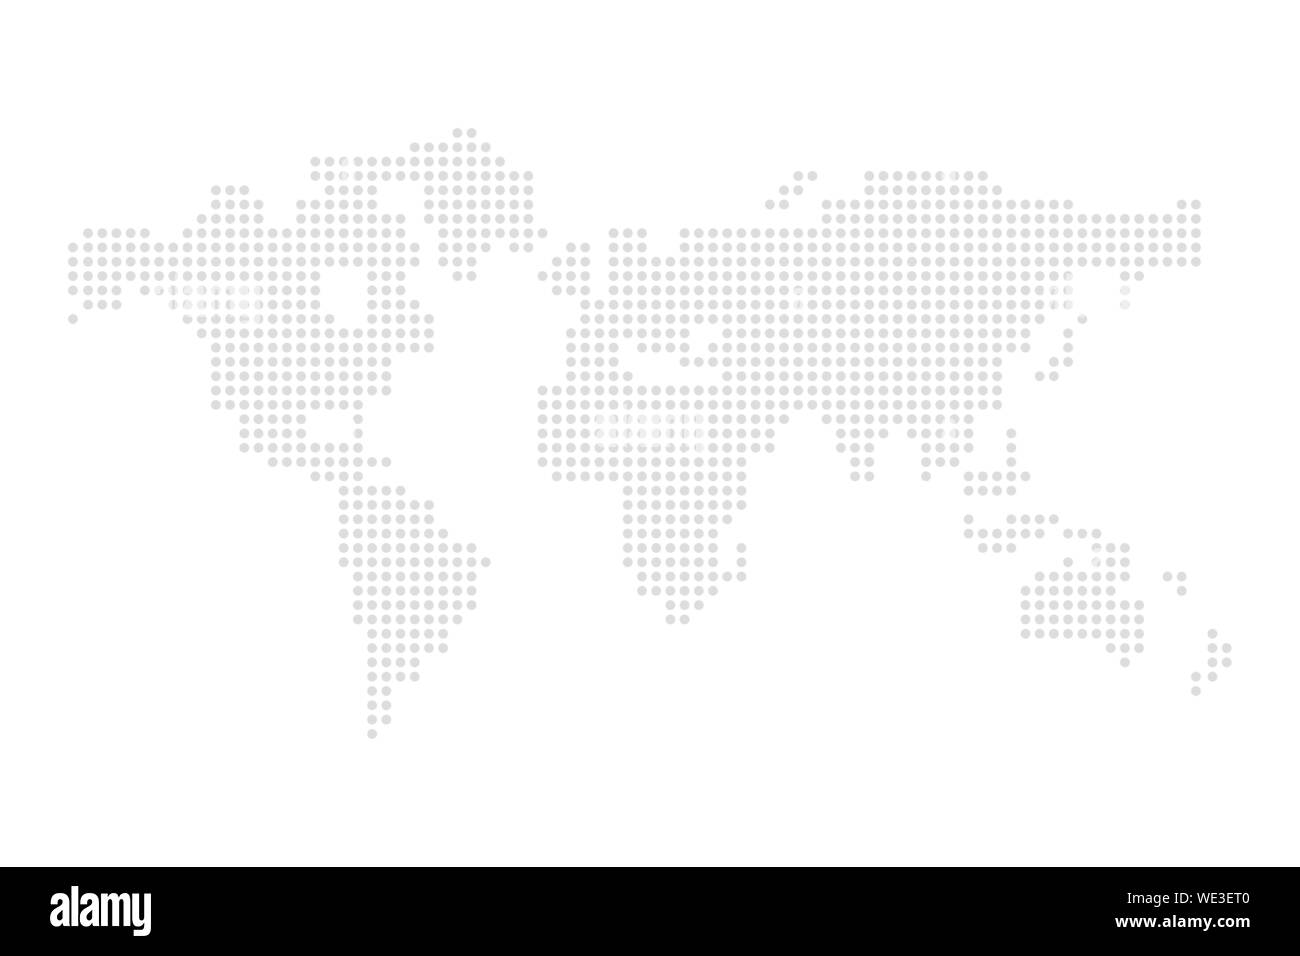 dotted grey world map illustration vector Stock Vector